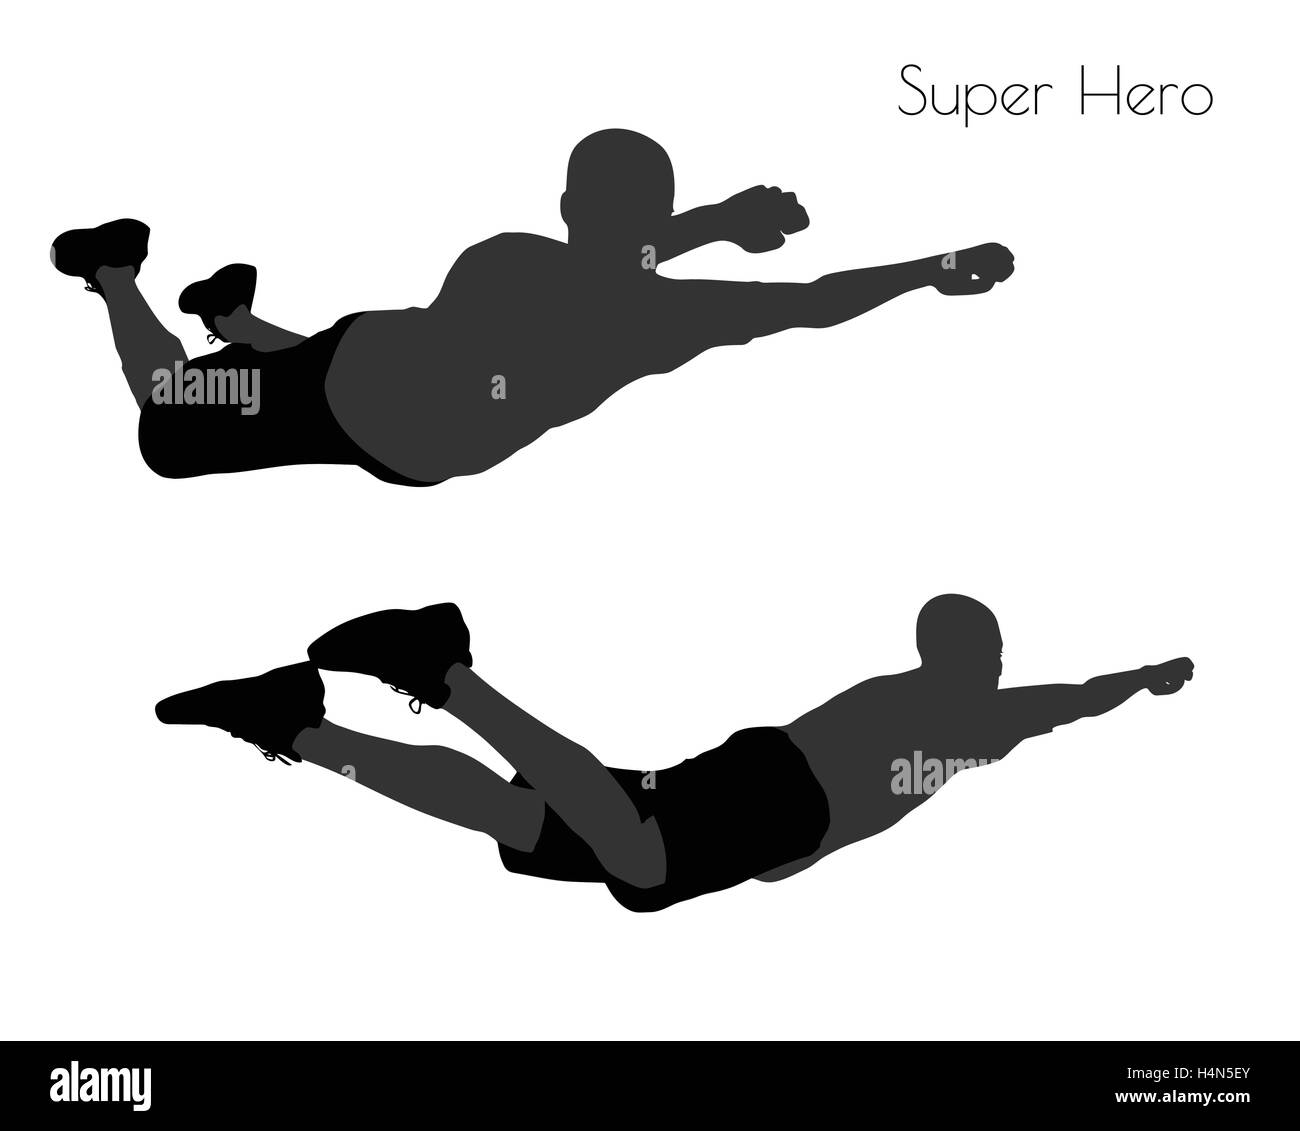 EPS 10 vector illustration of a man in Super Hero pose on white background Stock Vector